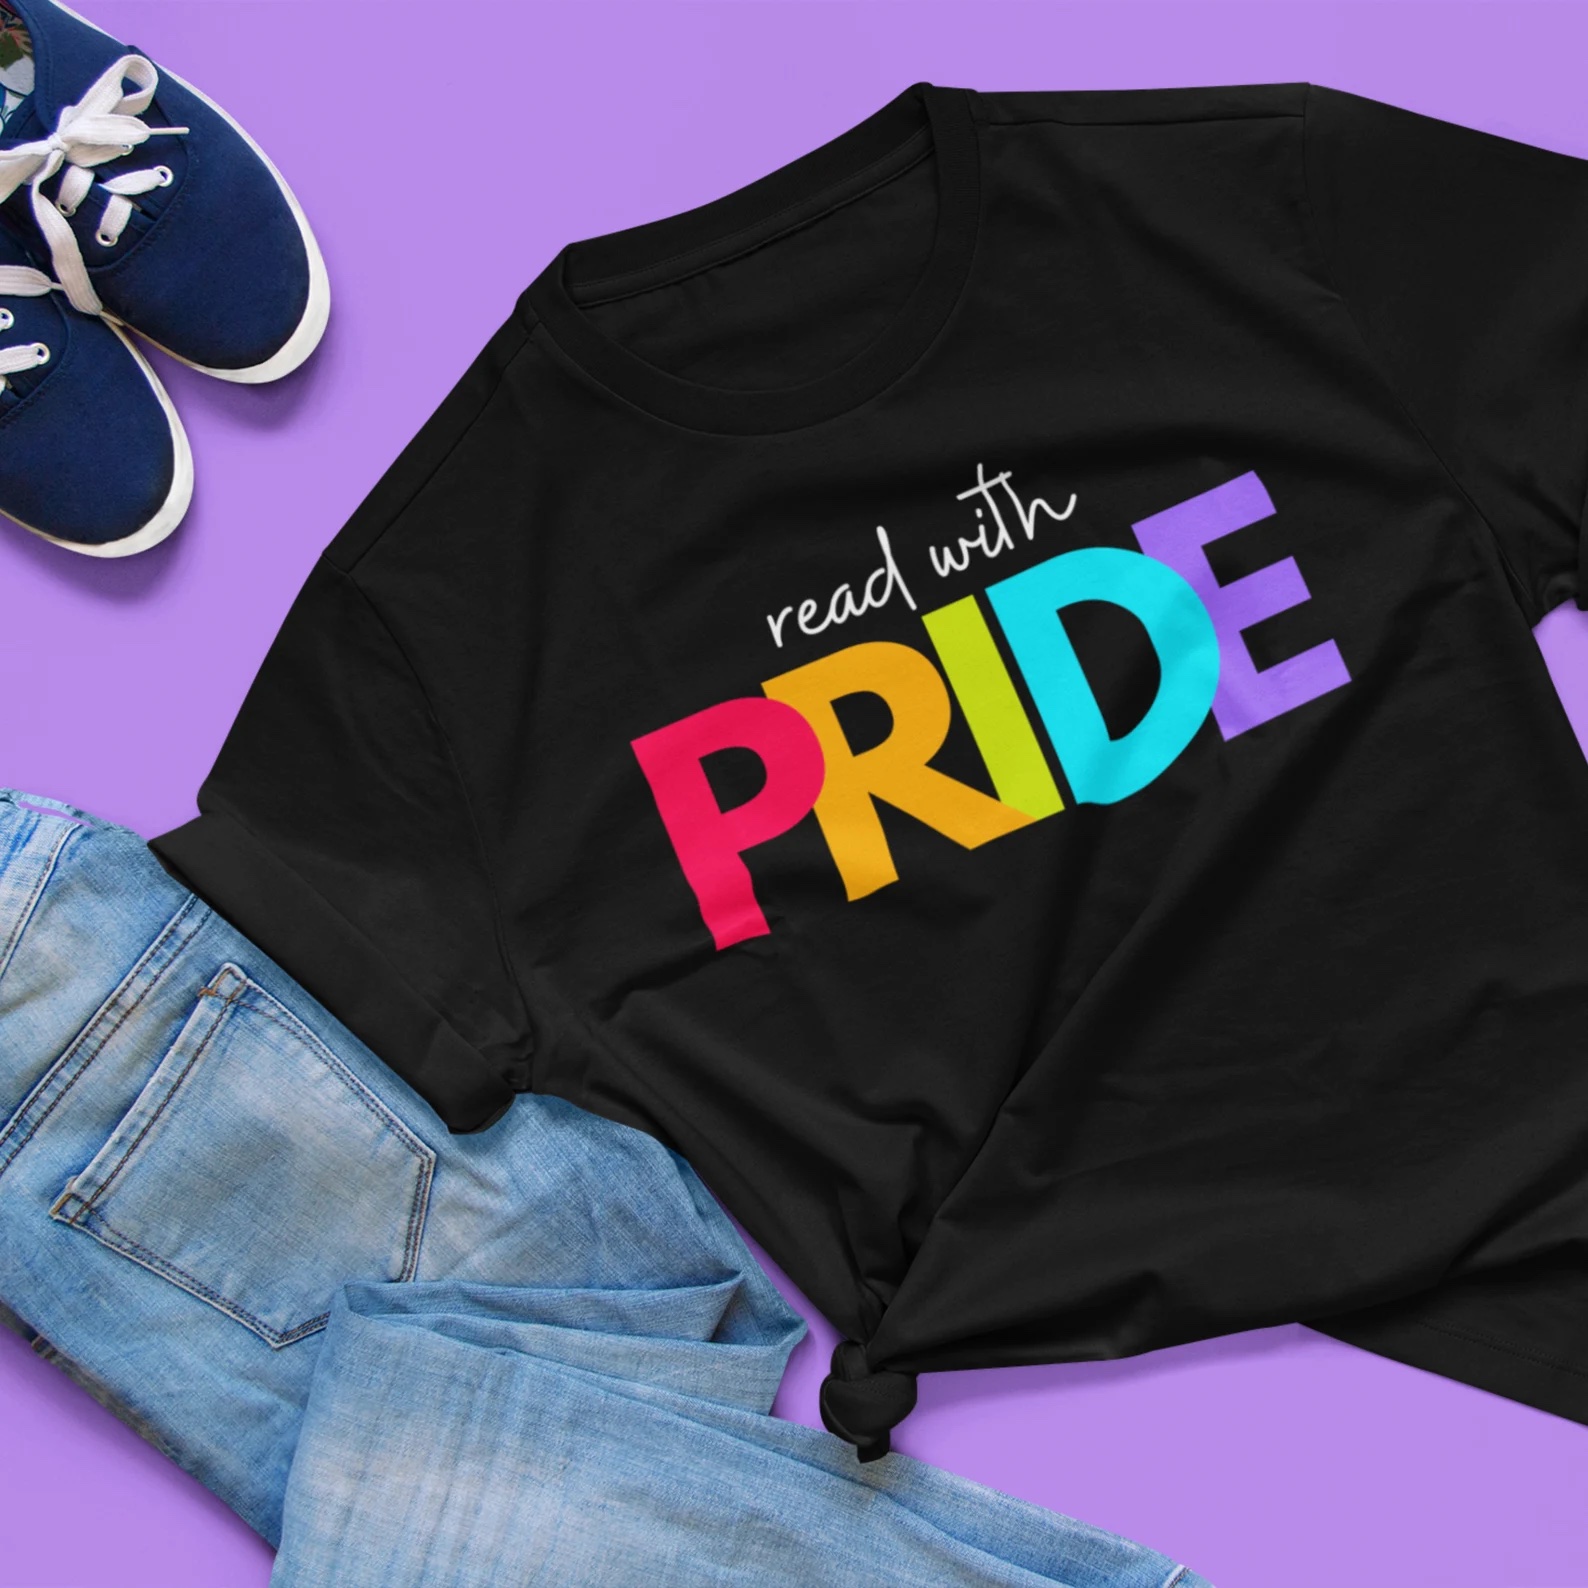 a photo of a black t-shirt that says, "read with pride." "Pride" is in rainbow letters.